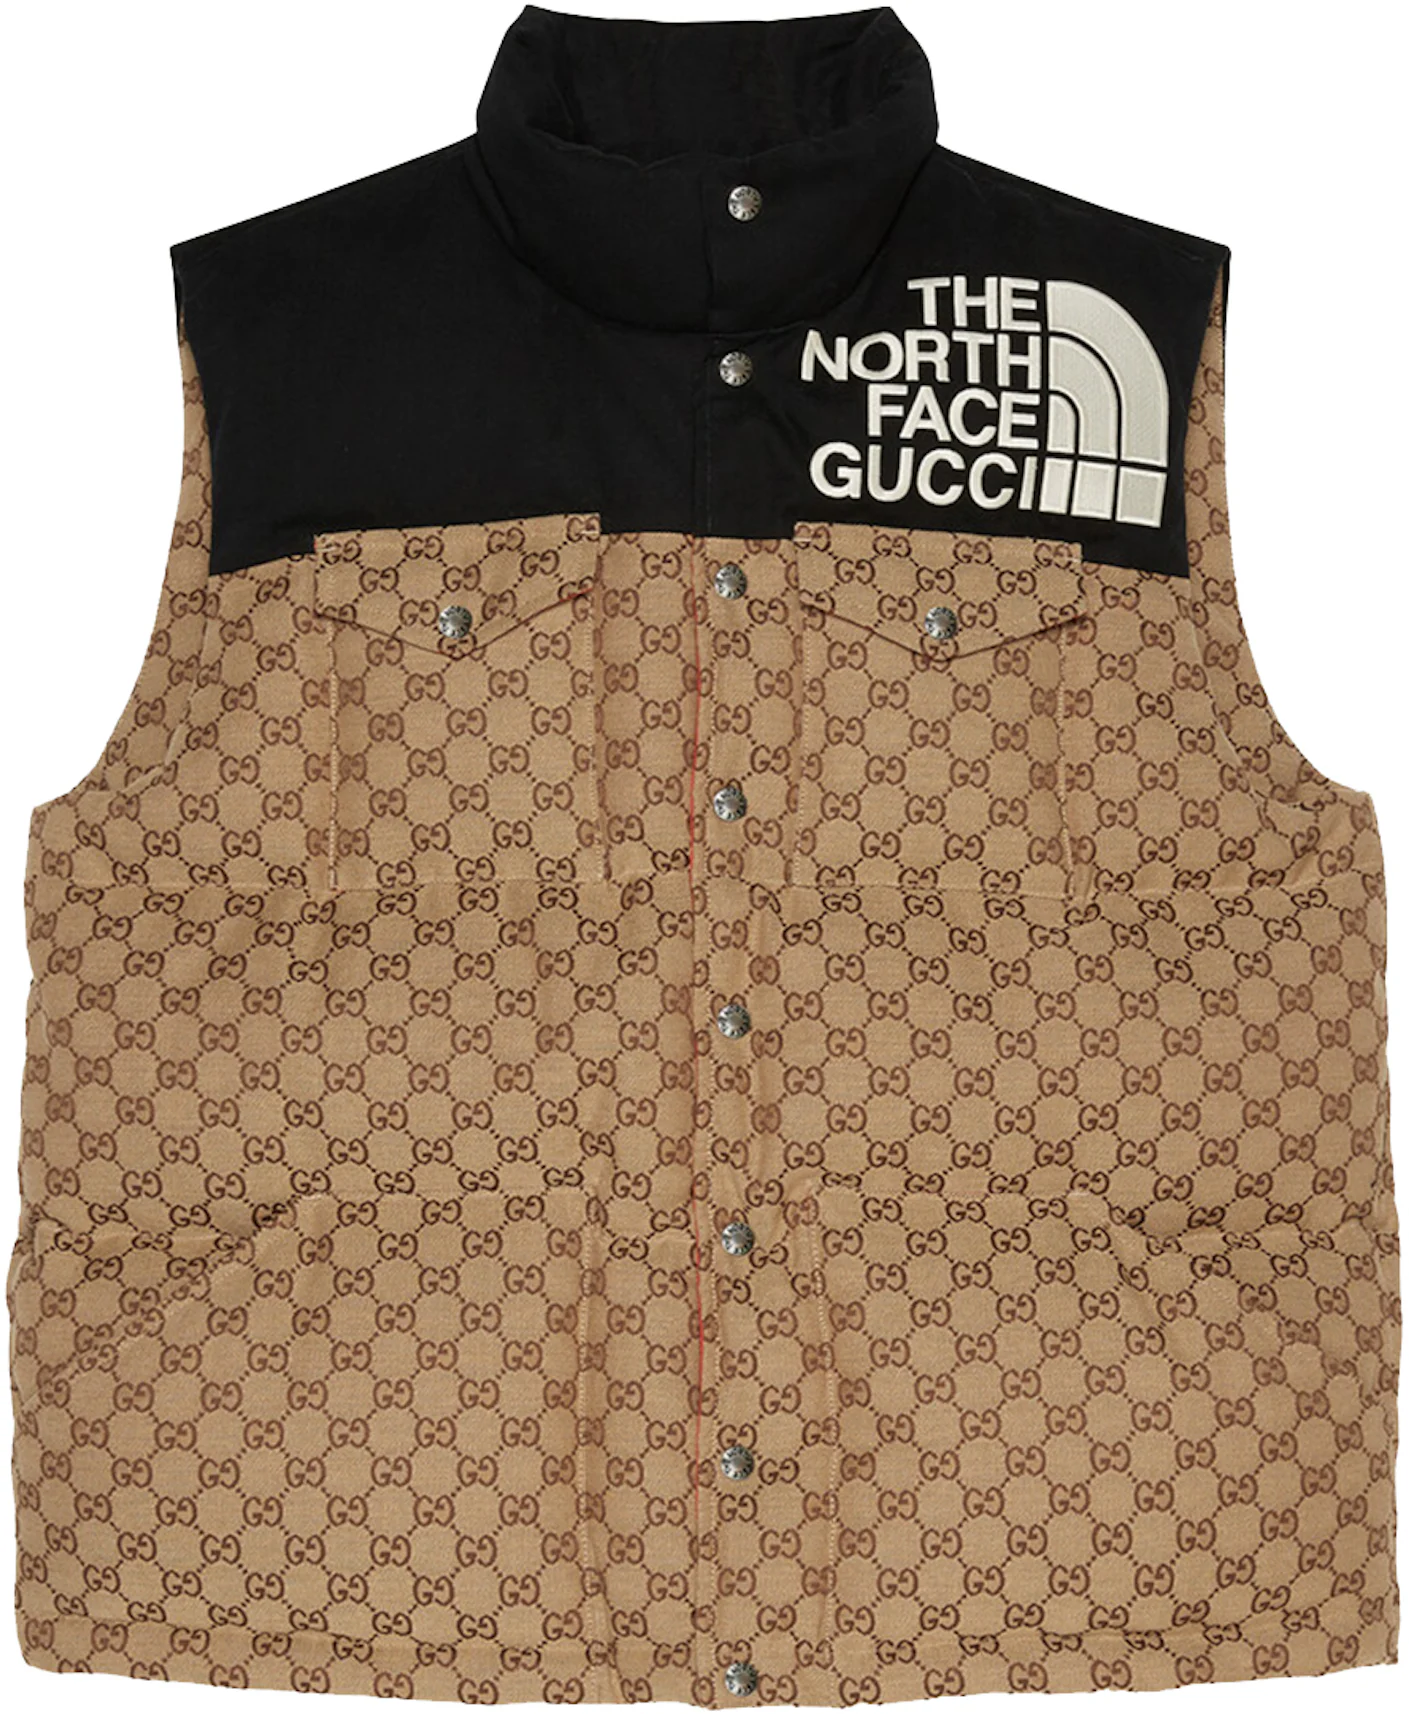 Gucci x The North Face Womens GG Padded Vest Black Ebony Beige - SS21 - US